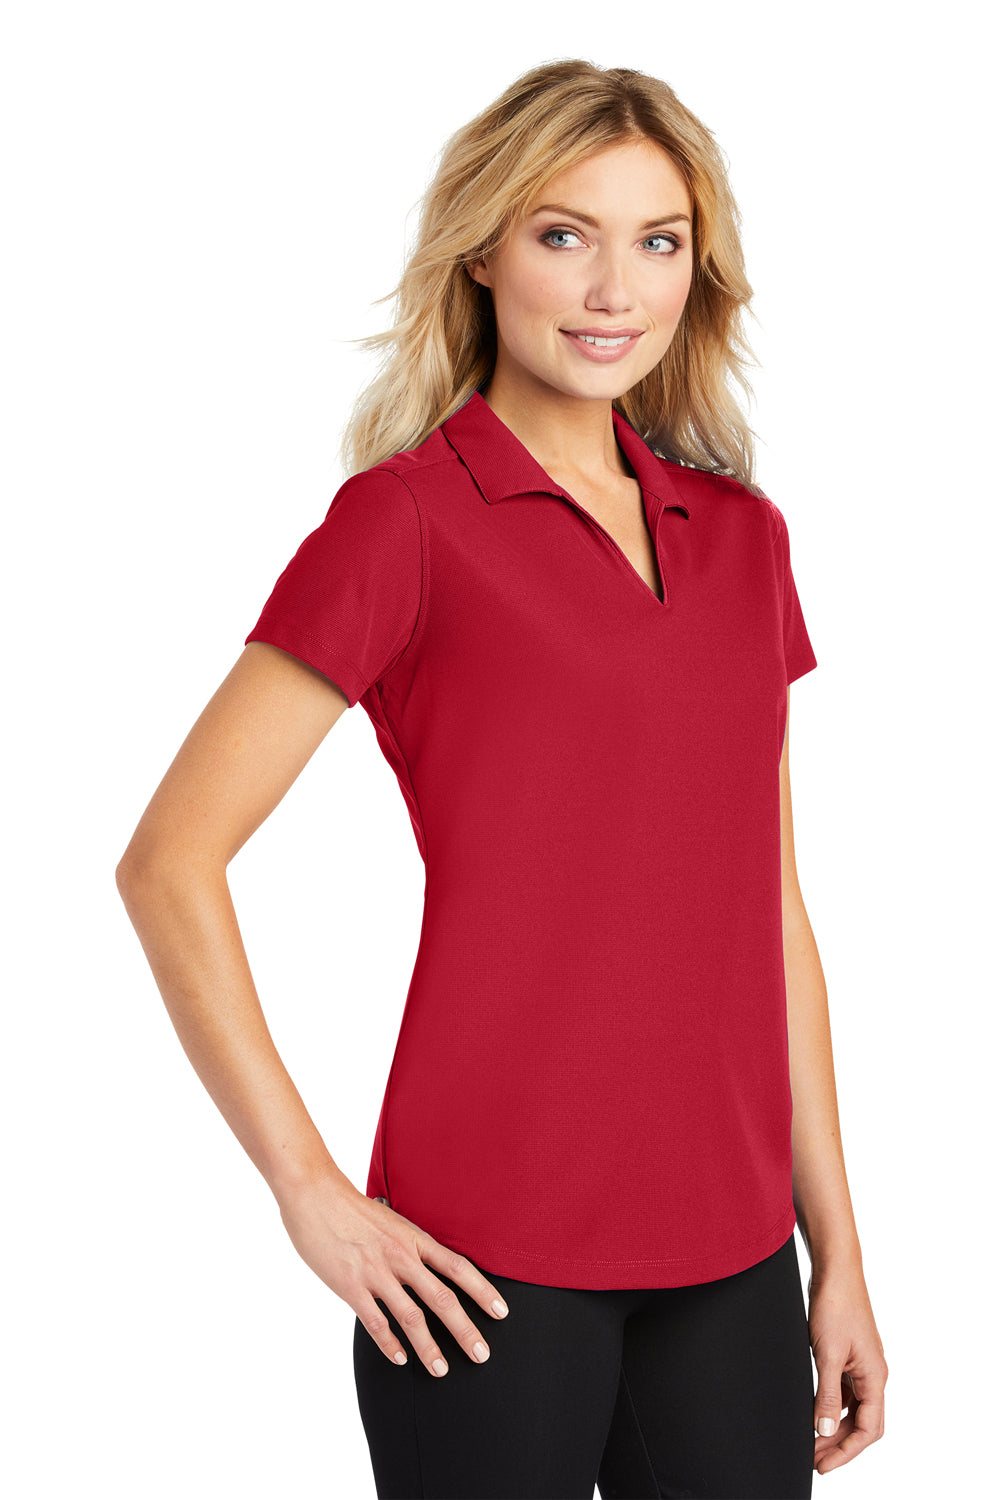 Port Authority L572 Womens Dry Zone Moisture Wicking Short Sleeve Polo Shirt Engine Red 3Q